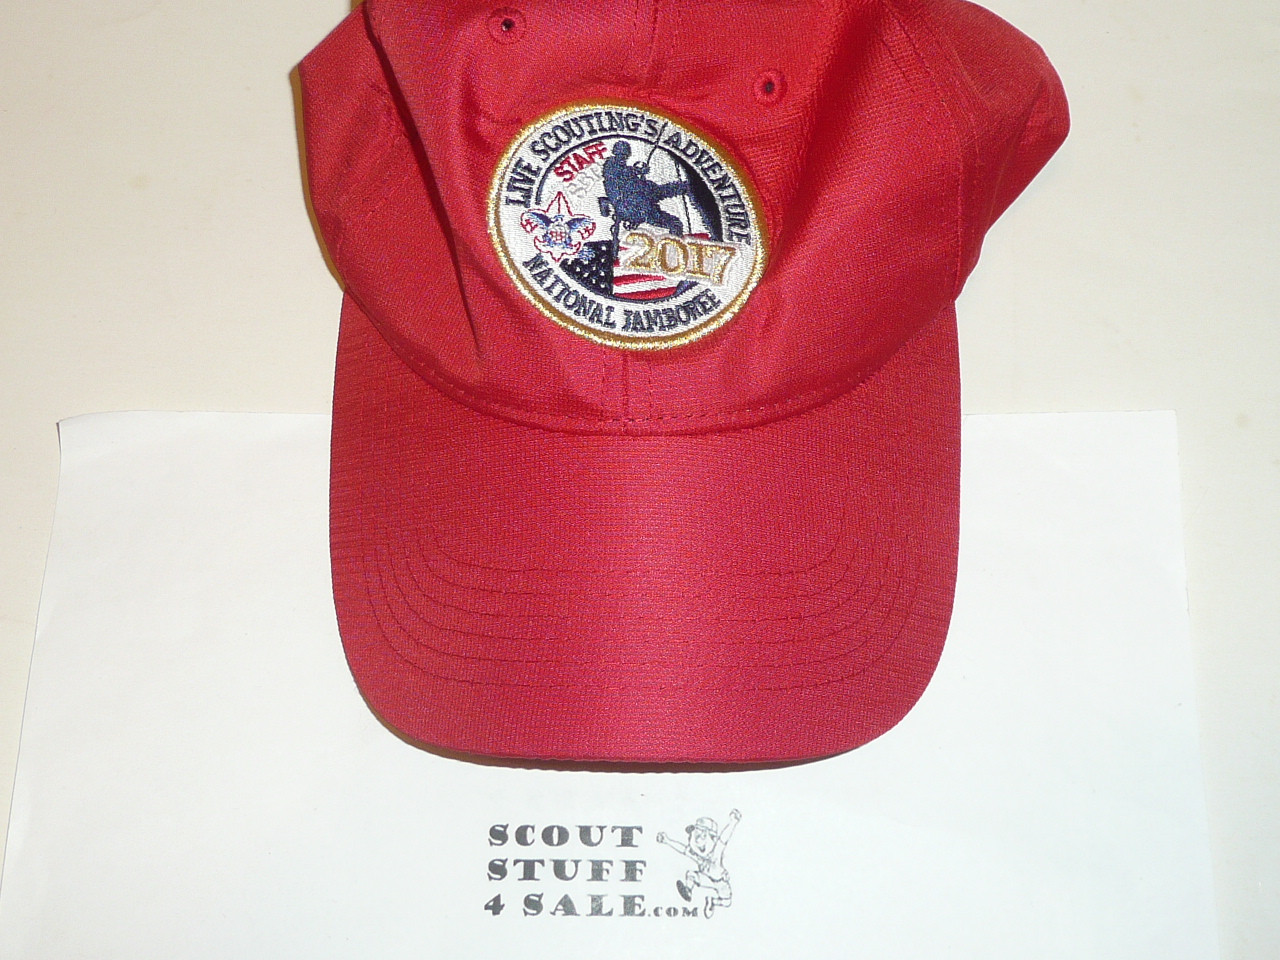 2017 National Jamboree Official STAFF Hat